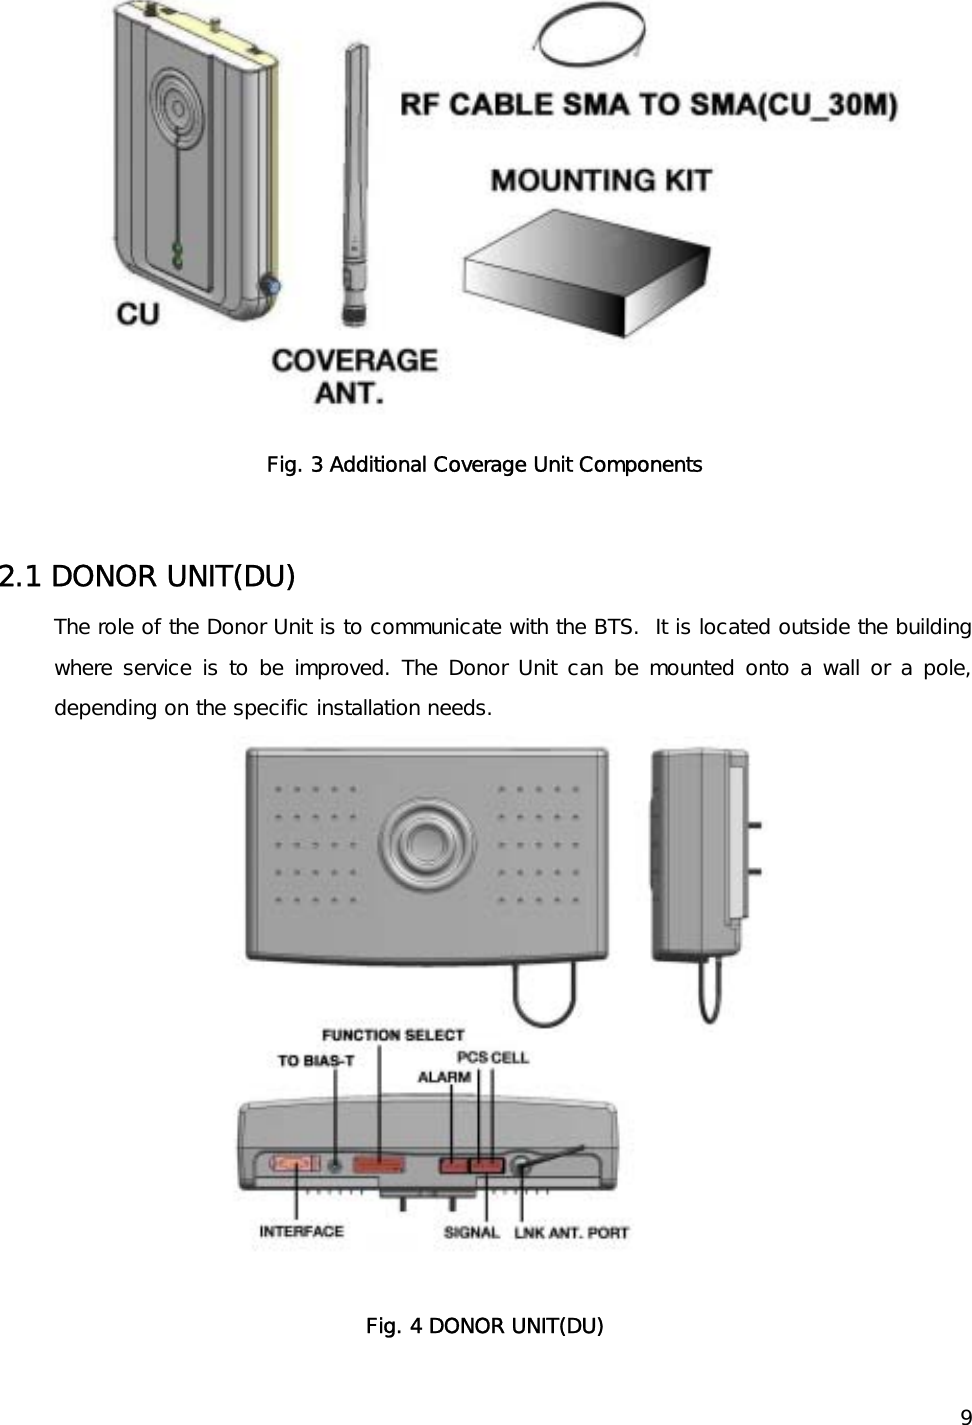    9 Fig. 3 Additional Coverage Unit Components  2.1 DONOR UNIT(DU)  The role of the Donor Unit is to communicate with the BTS.  It is located outside the building where service is to be improved. The Donor Unit can be mounted onto a wall or a pole, depending on the specific installation needs.  Fig. 4 DONOR UNIT(DU) 